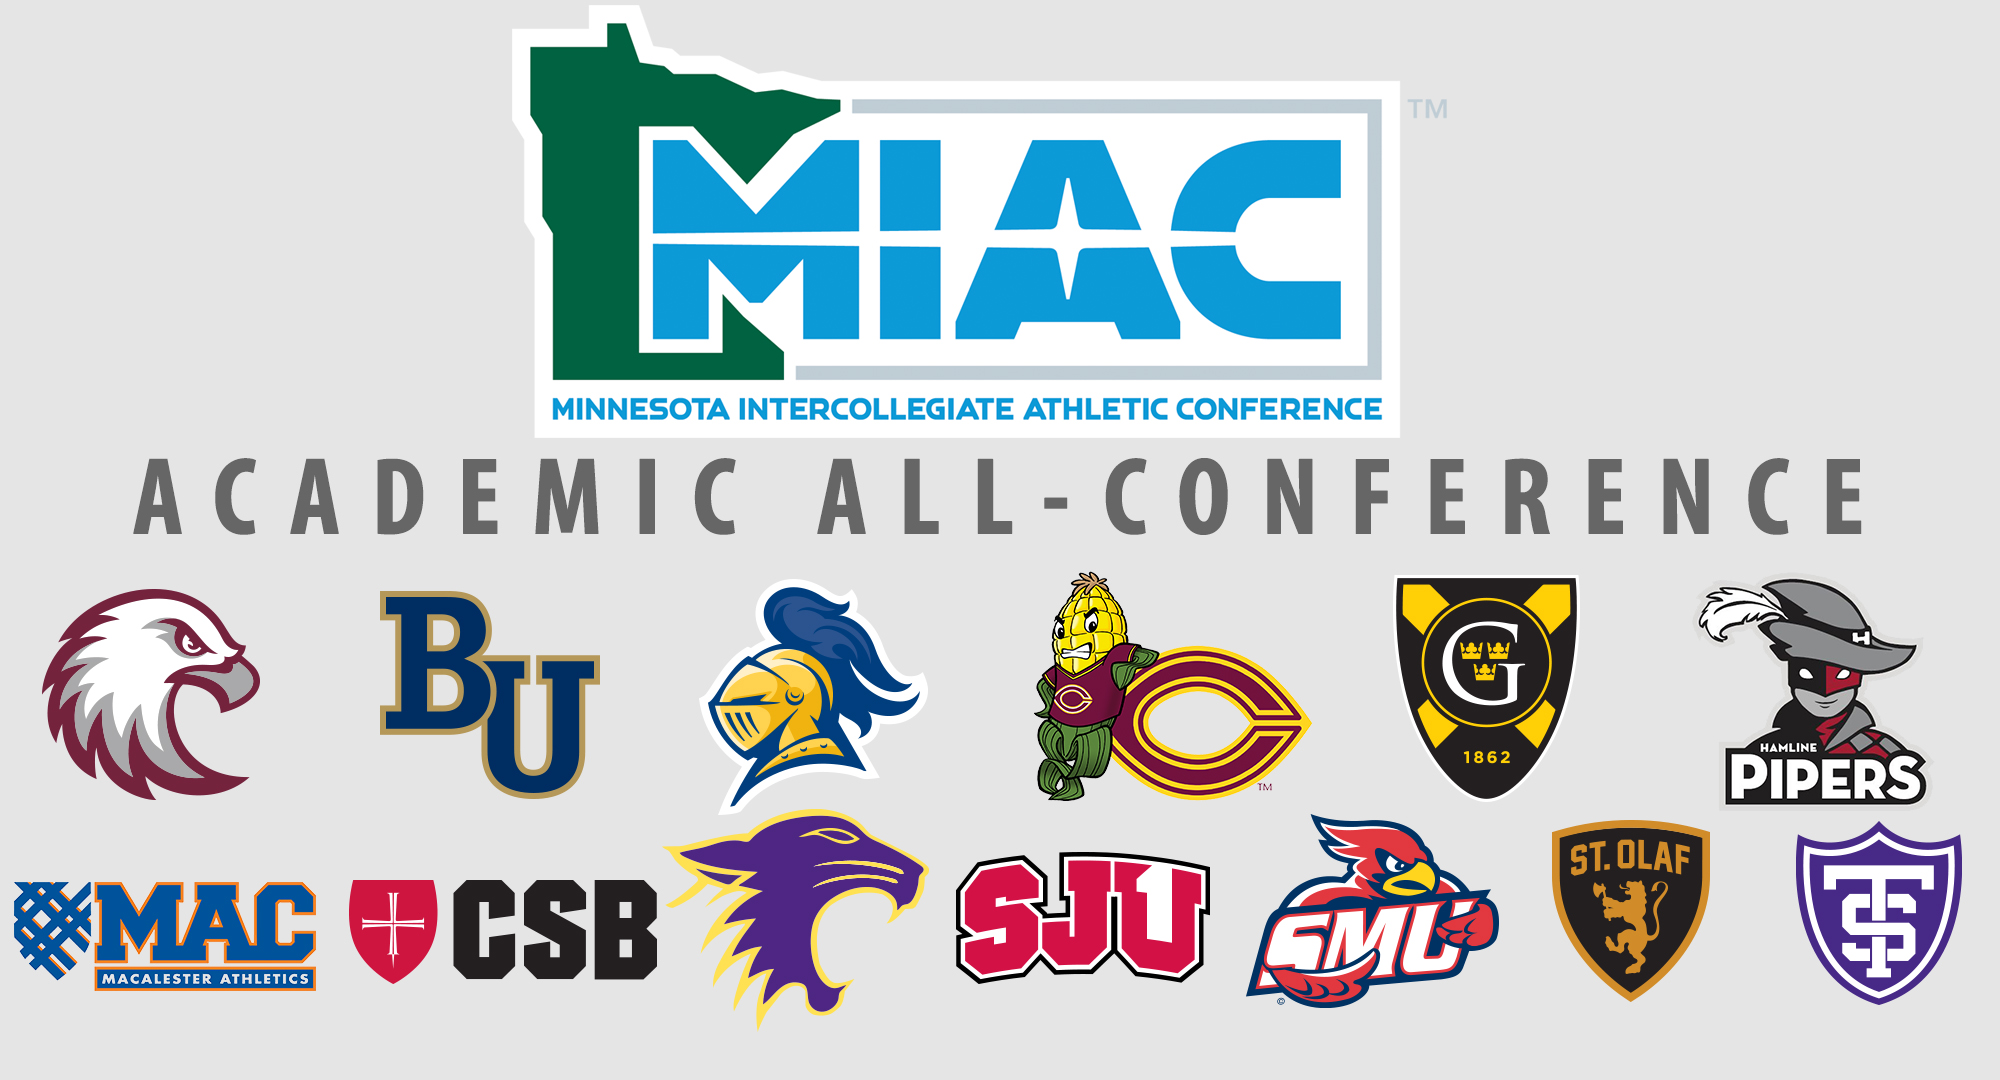 Concordia had 56 winter/sports student/athletes earn MIAC Academic All-Conference honors.